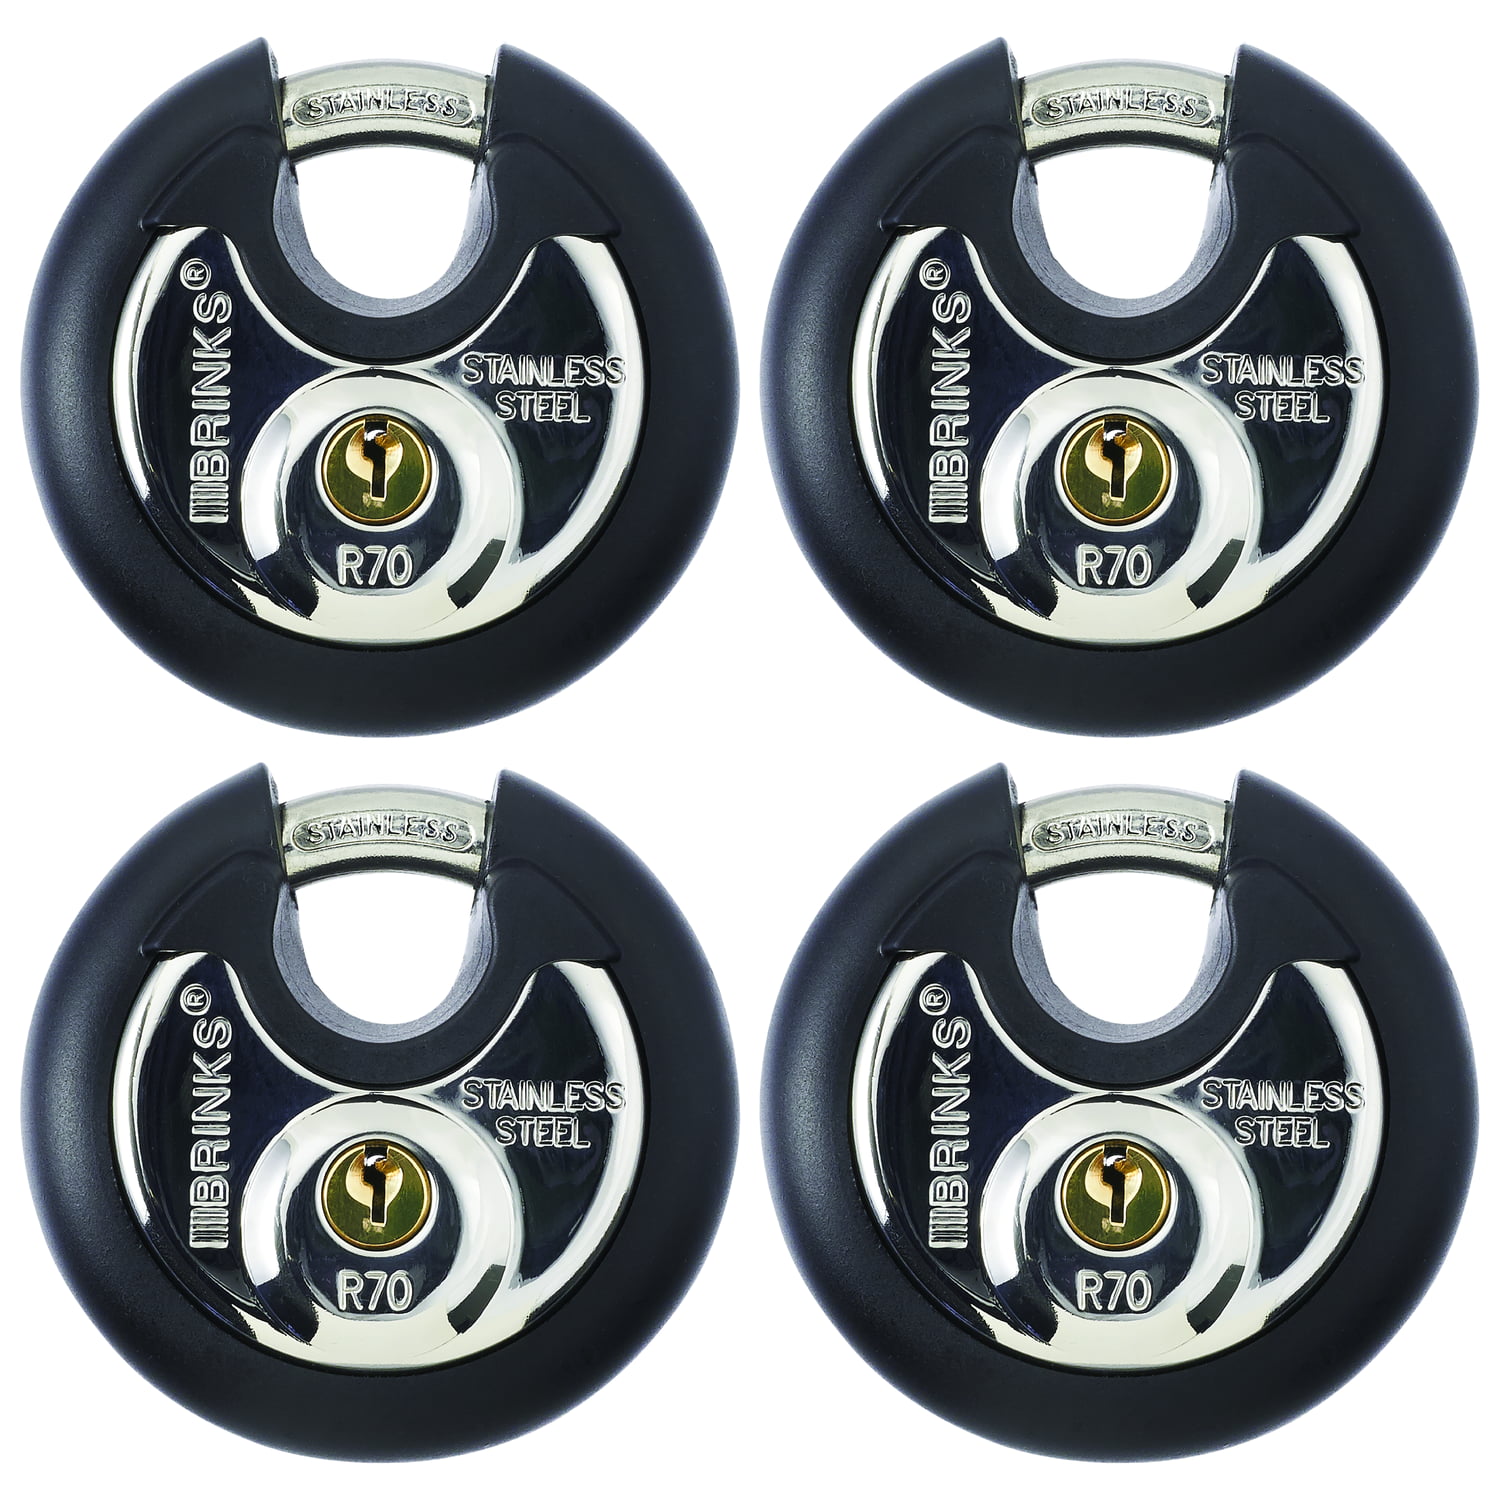 4-Count 70mm Brinks Commercial Stainless Steel Discus Padlocks $17 ($4.25 each) + Free S&H w/ Walmart+ or $35+